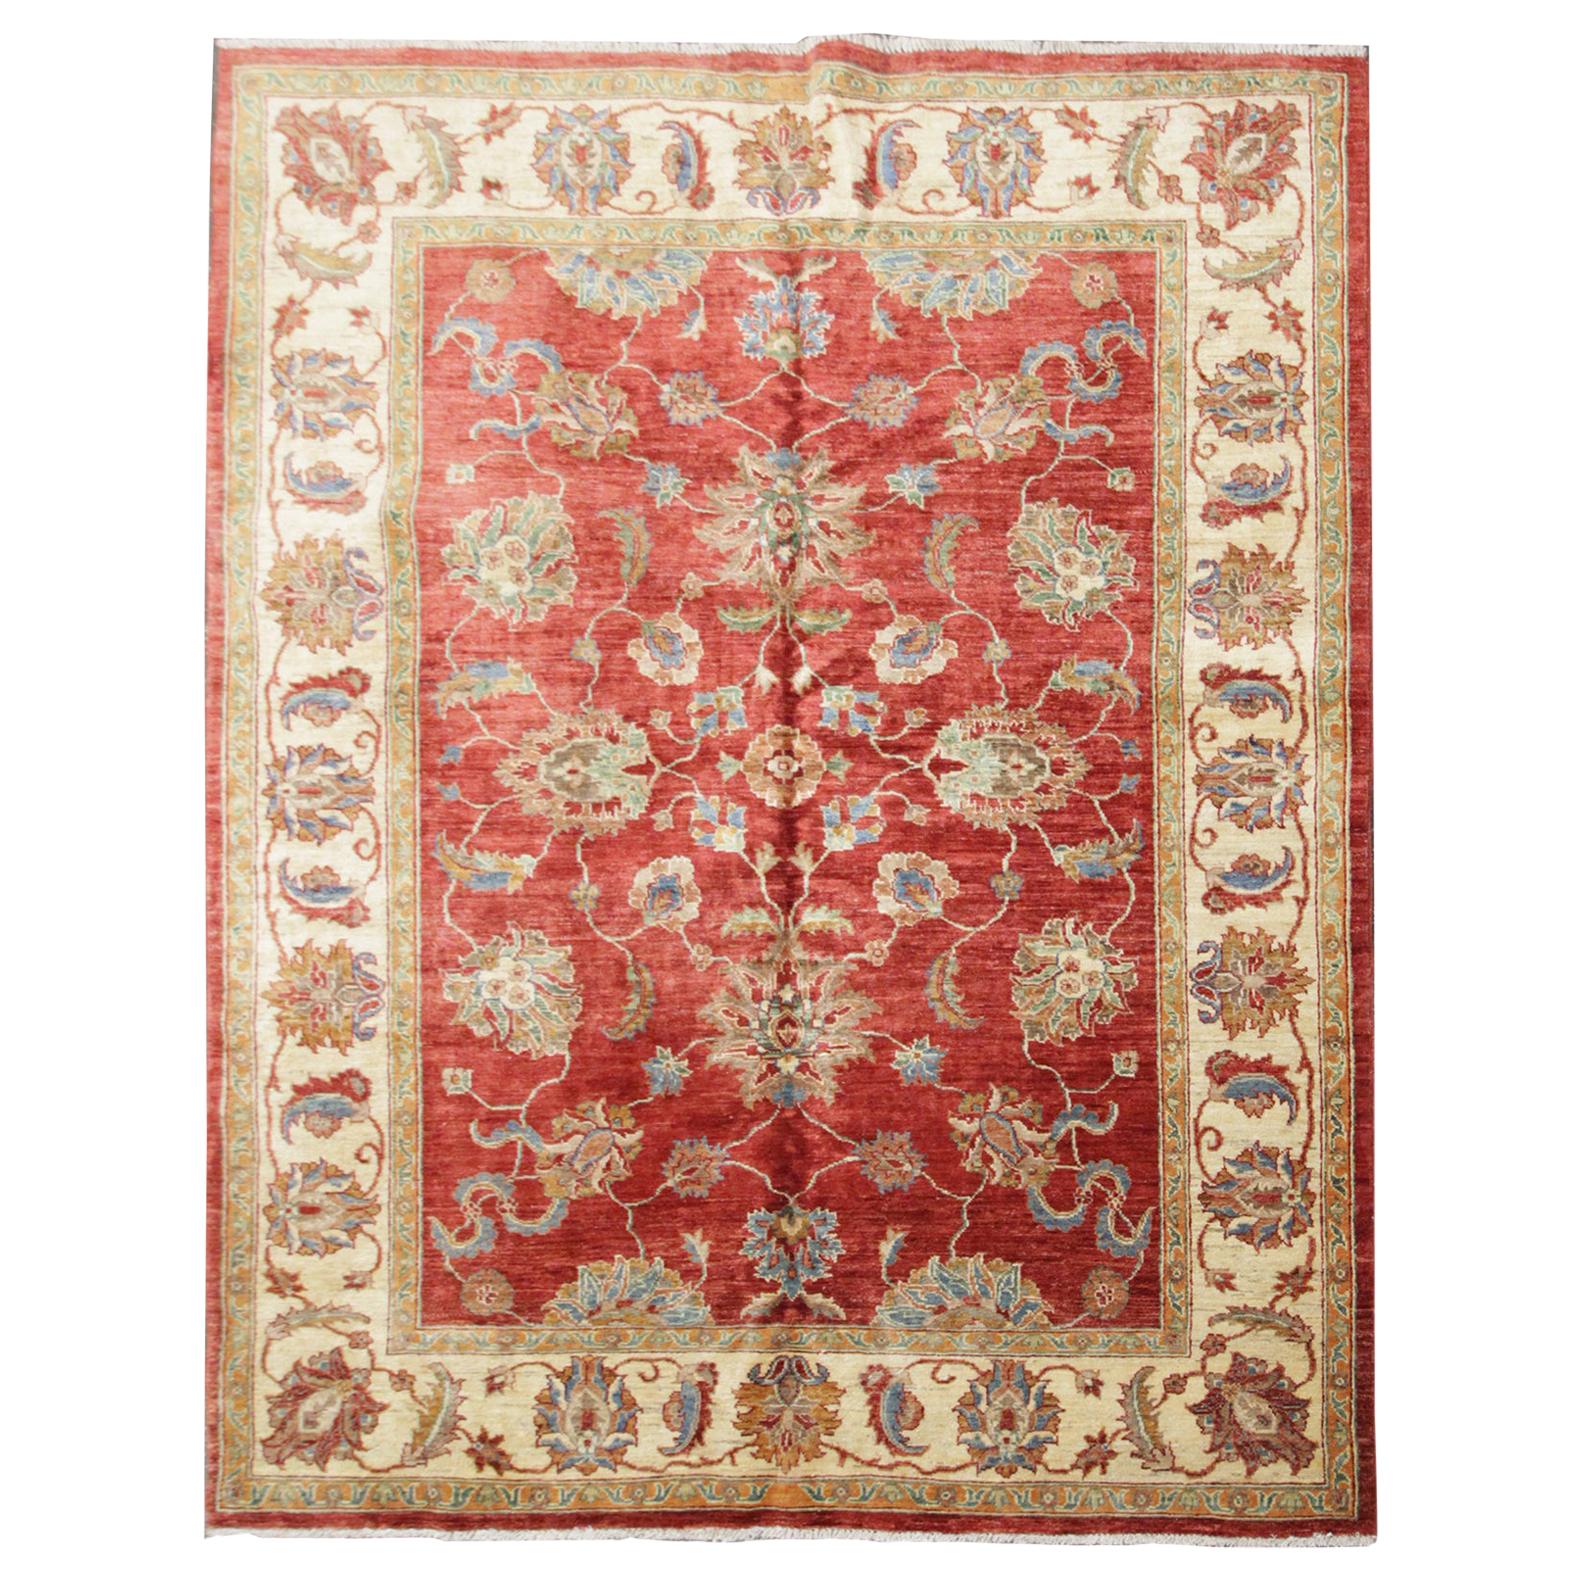 Handmade Rug Traditional Floral Ziegler Style Carpet Living Room Rugs for Sale